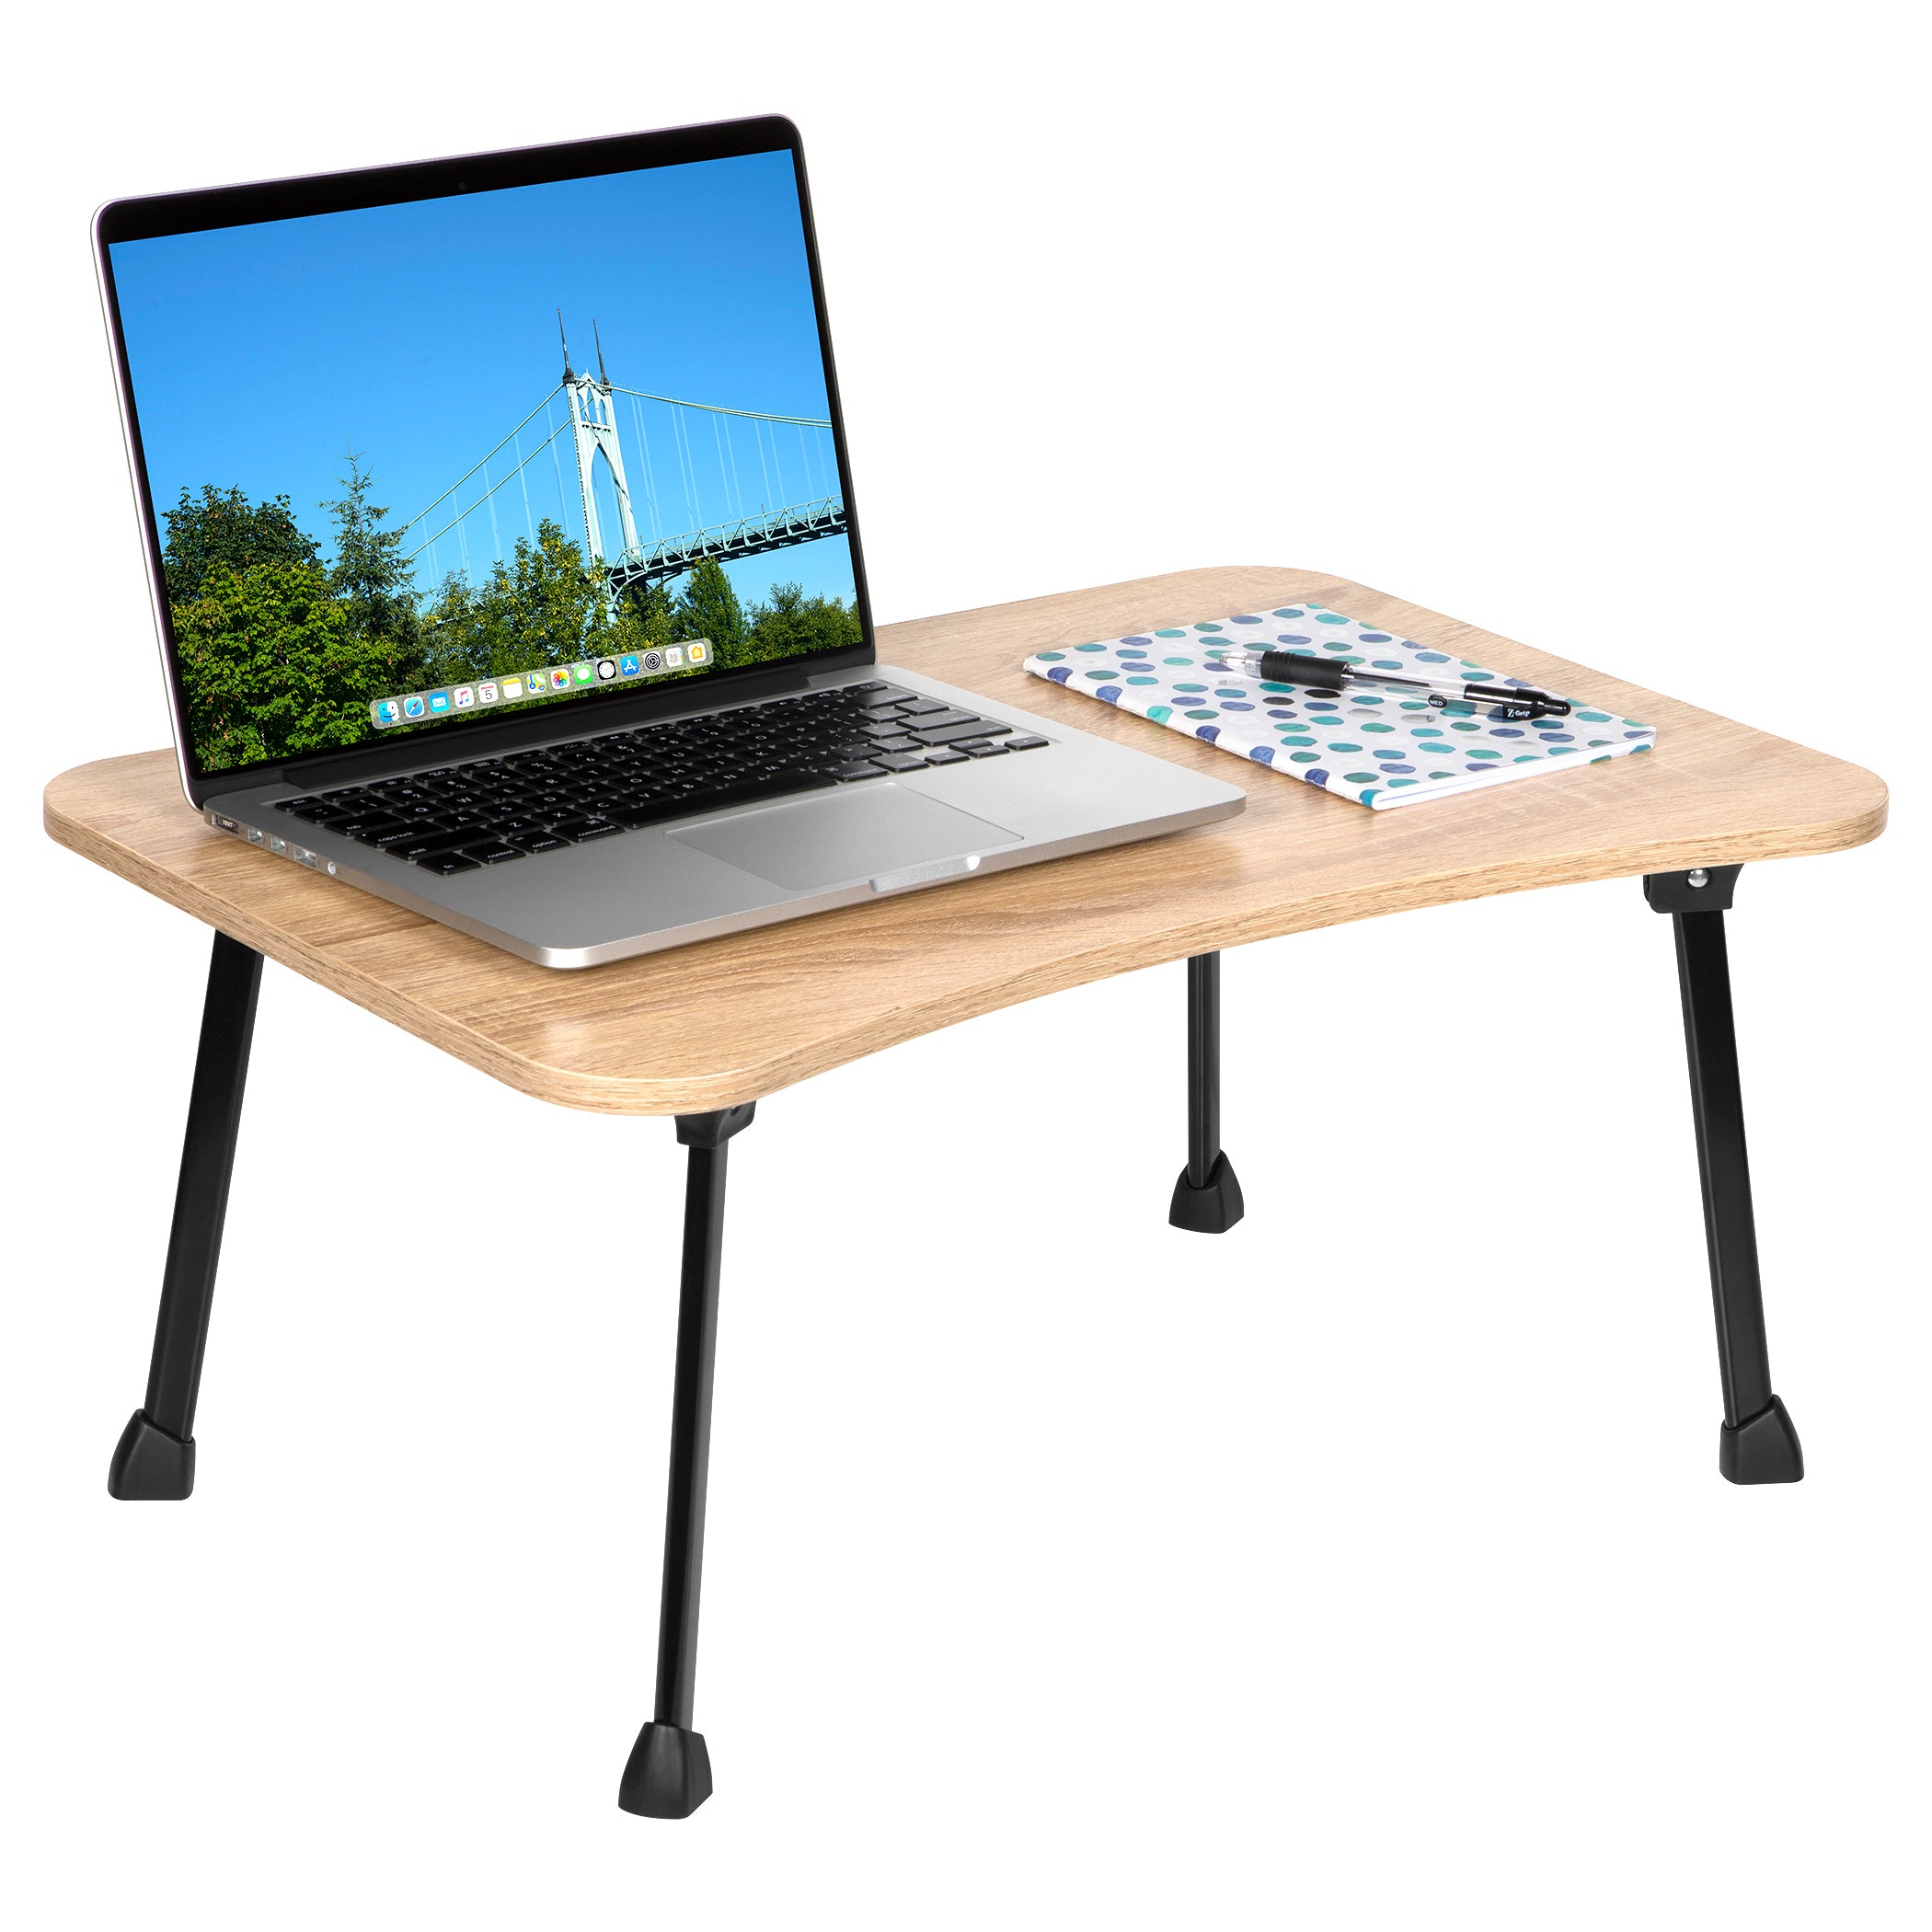 Lap Desk Foldable – Bed Tray for College Dorm and Home – with Handles and Foldable Legs - Perfect Laptop Desk – Perfect for Writing, Eating, Working, Studying - Wood Top Bed Table